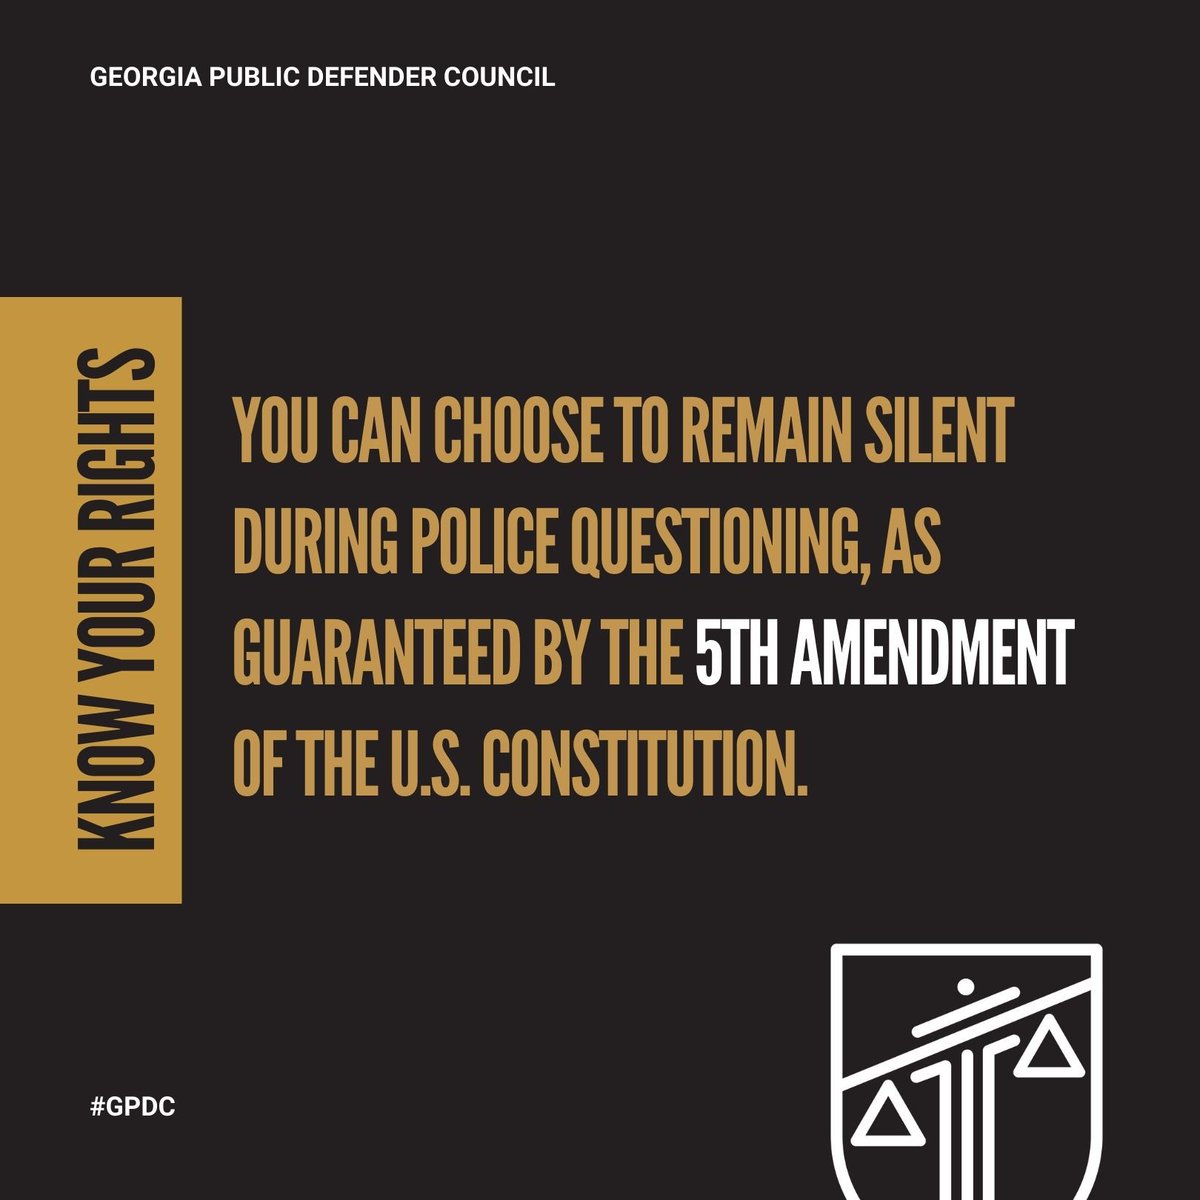 🚨 Know Your Rights Alert! 🚨 Did you know that you have the right to remain silent during police questioning? Thanks to the #5thAmendment of the U.S. Constitution, you can choose not to answer questions to avoid self-incrimination #Share to spread the word! 📚✊ #KnowYourRights